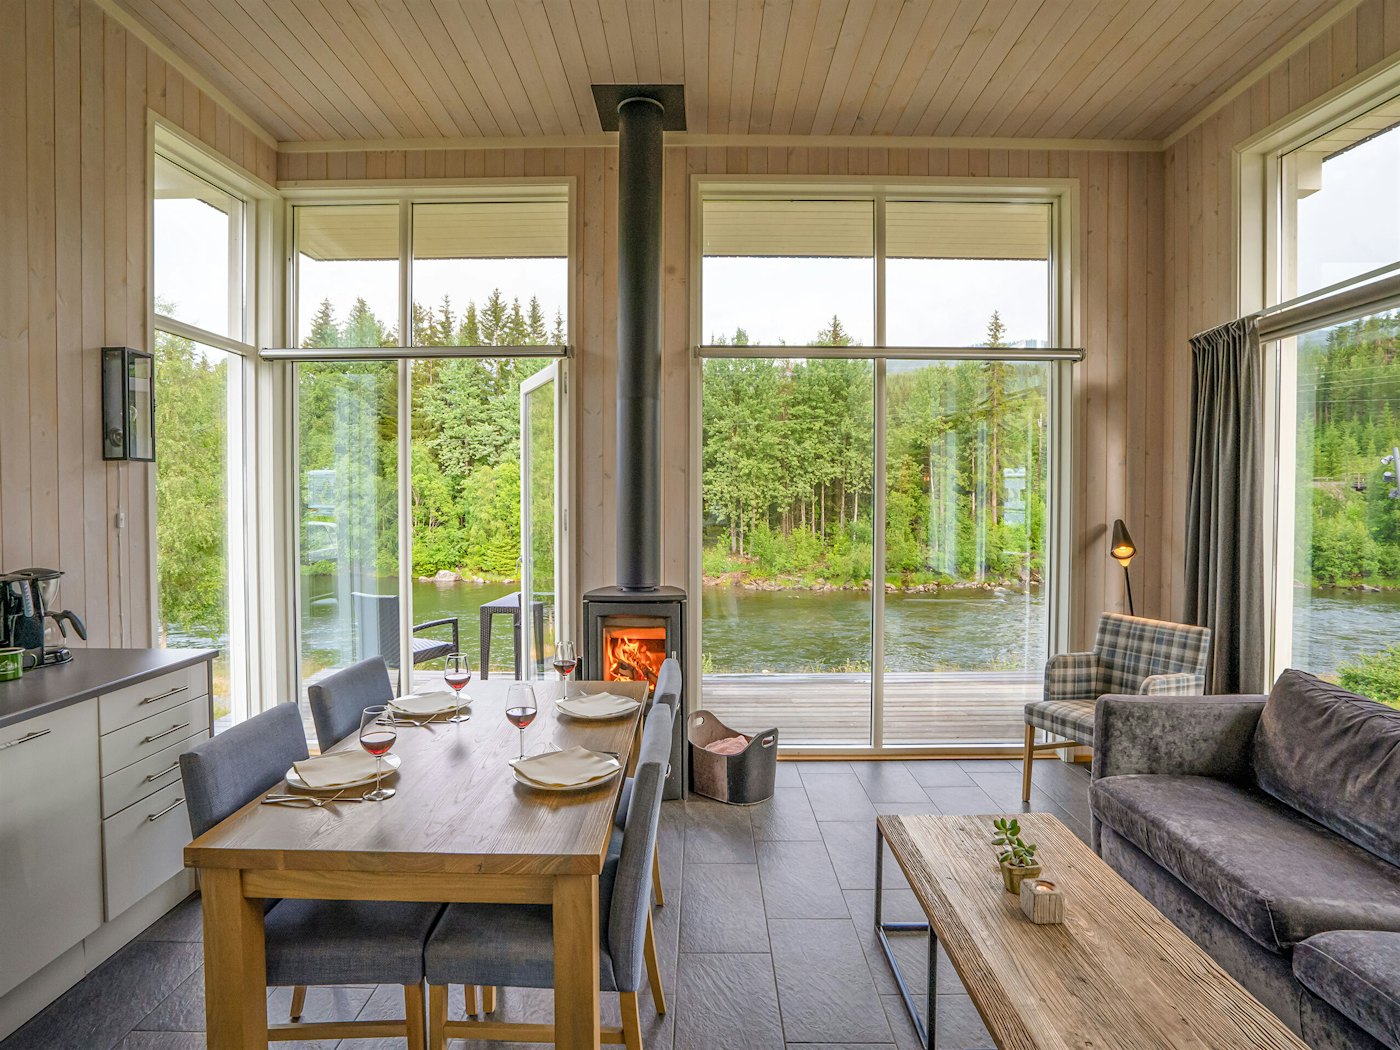 Bright living room with floor-to-ceiling windows, dining table, sofa and fireplace. View of green trees and river. Photo